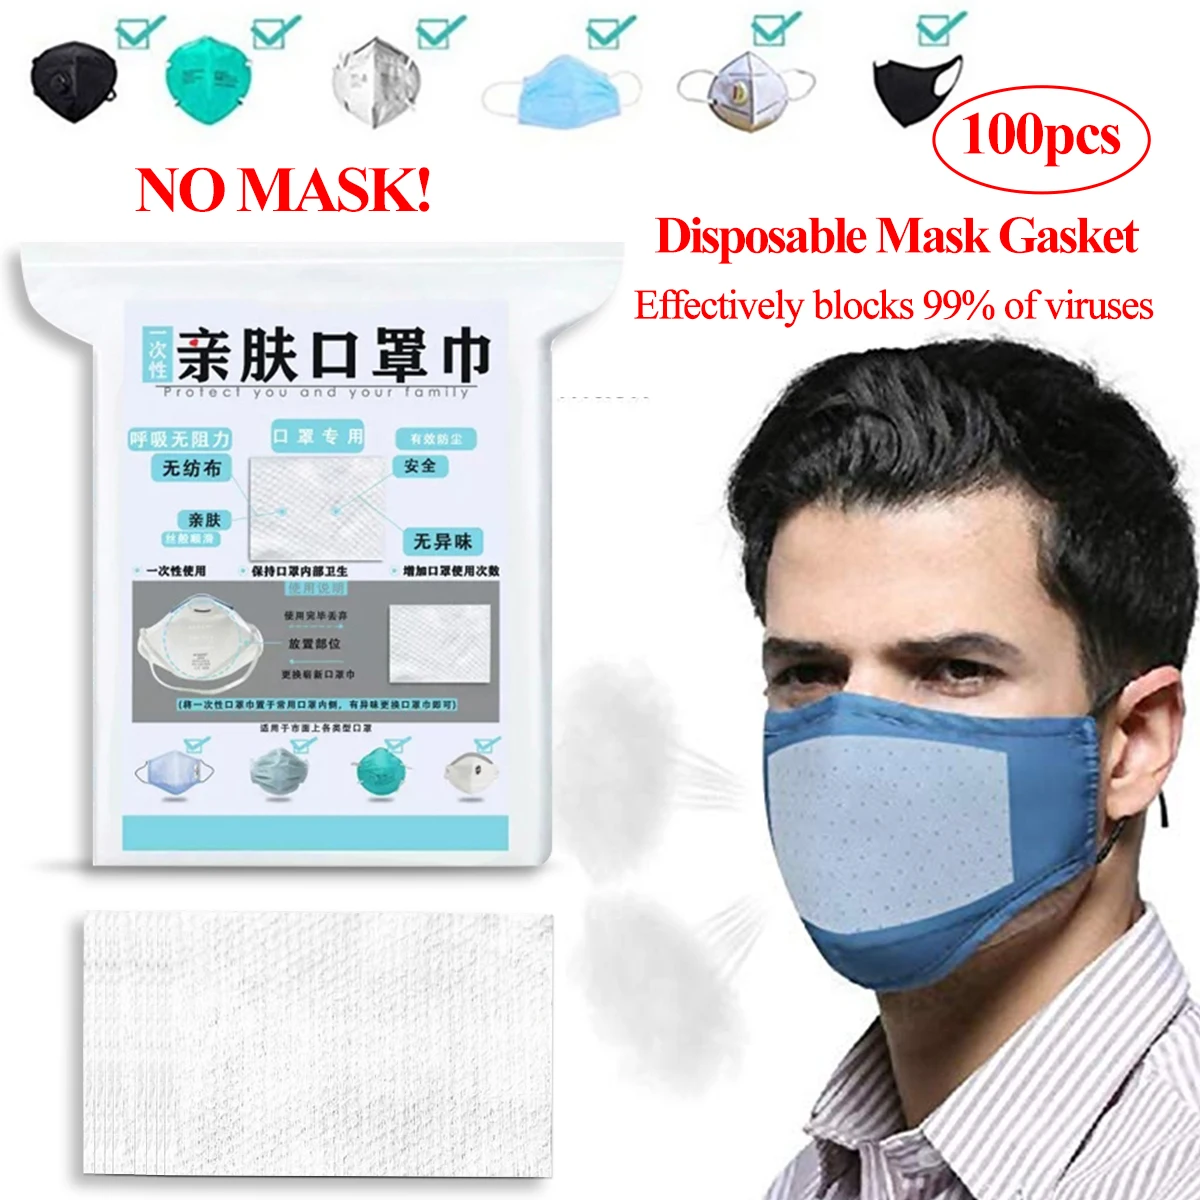 

Face Mask Mouth Protective Filter Disposable 100 Pcs With Slot N95 Activated 3 PM2.5 J049163 Mouth Face Mask